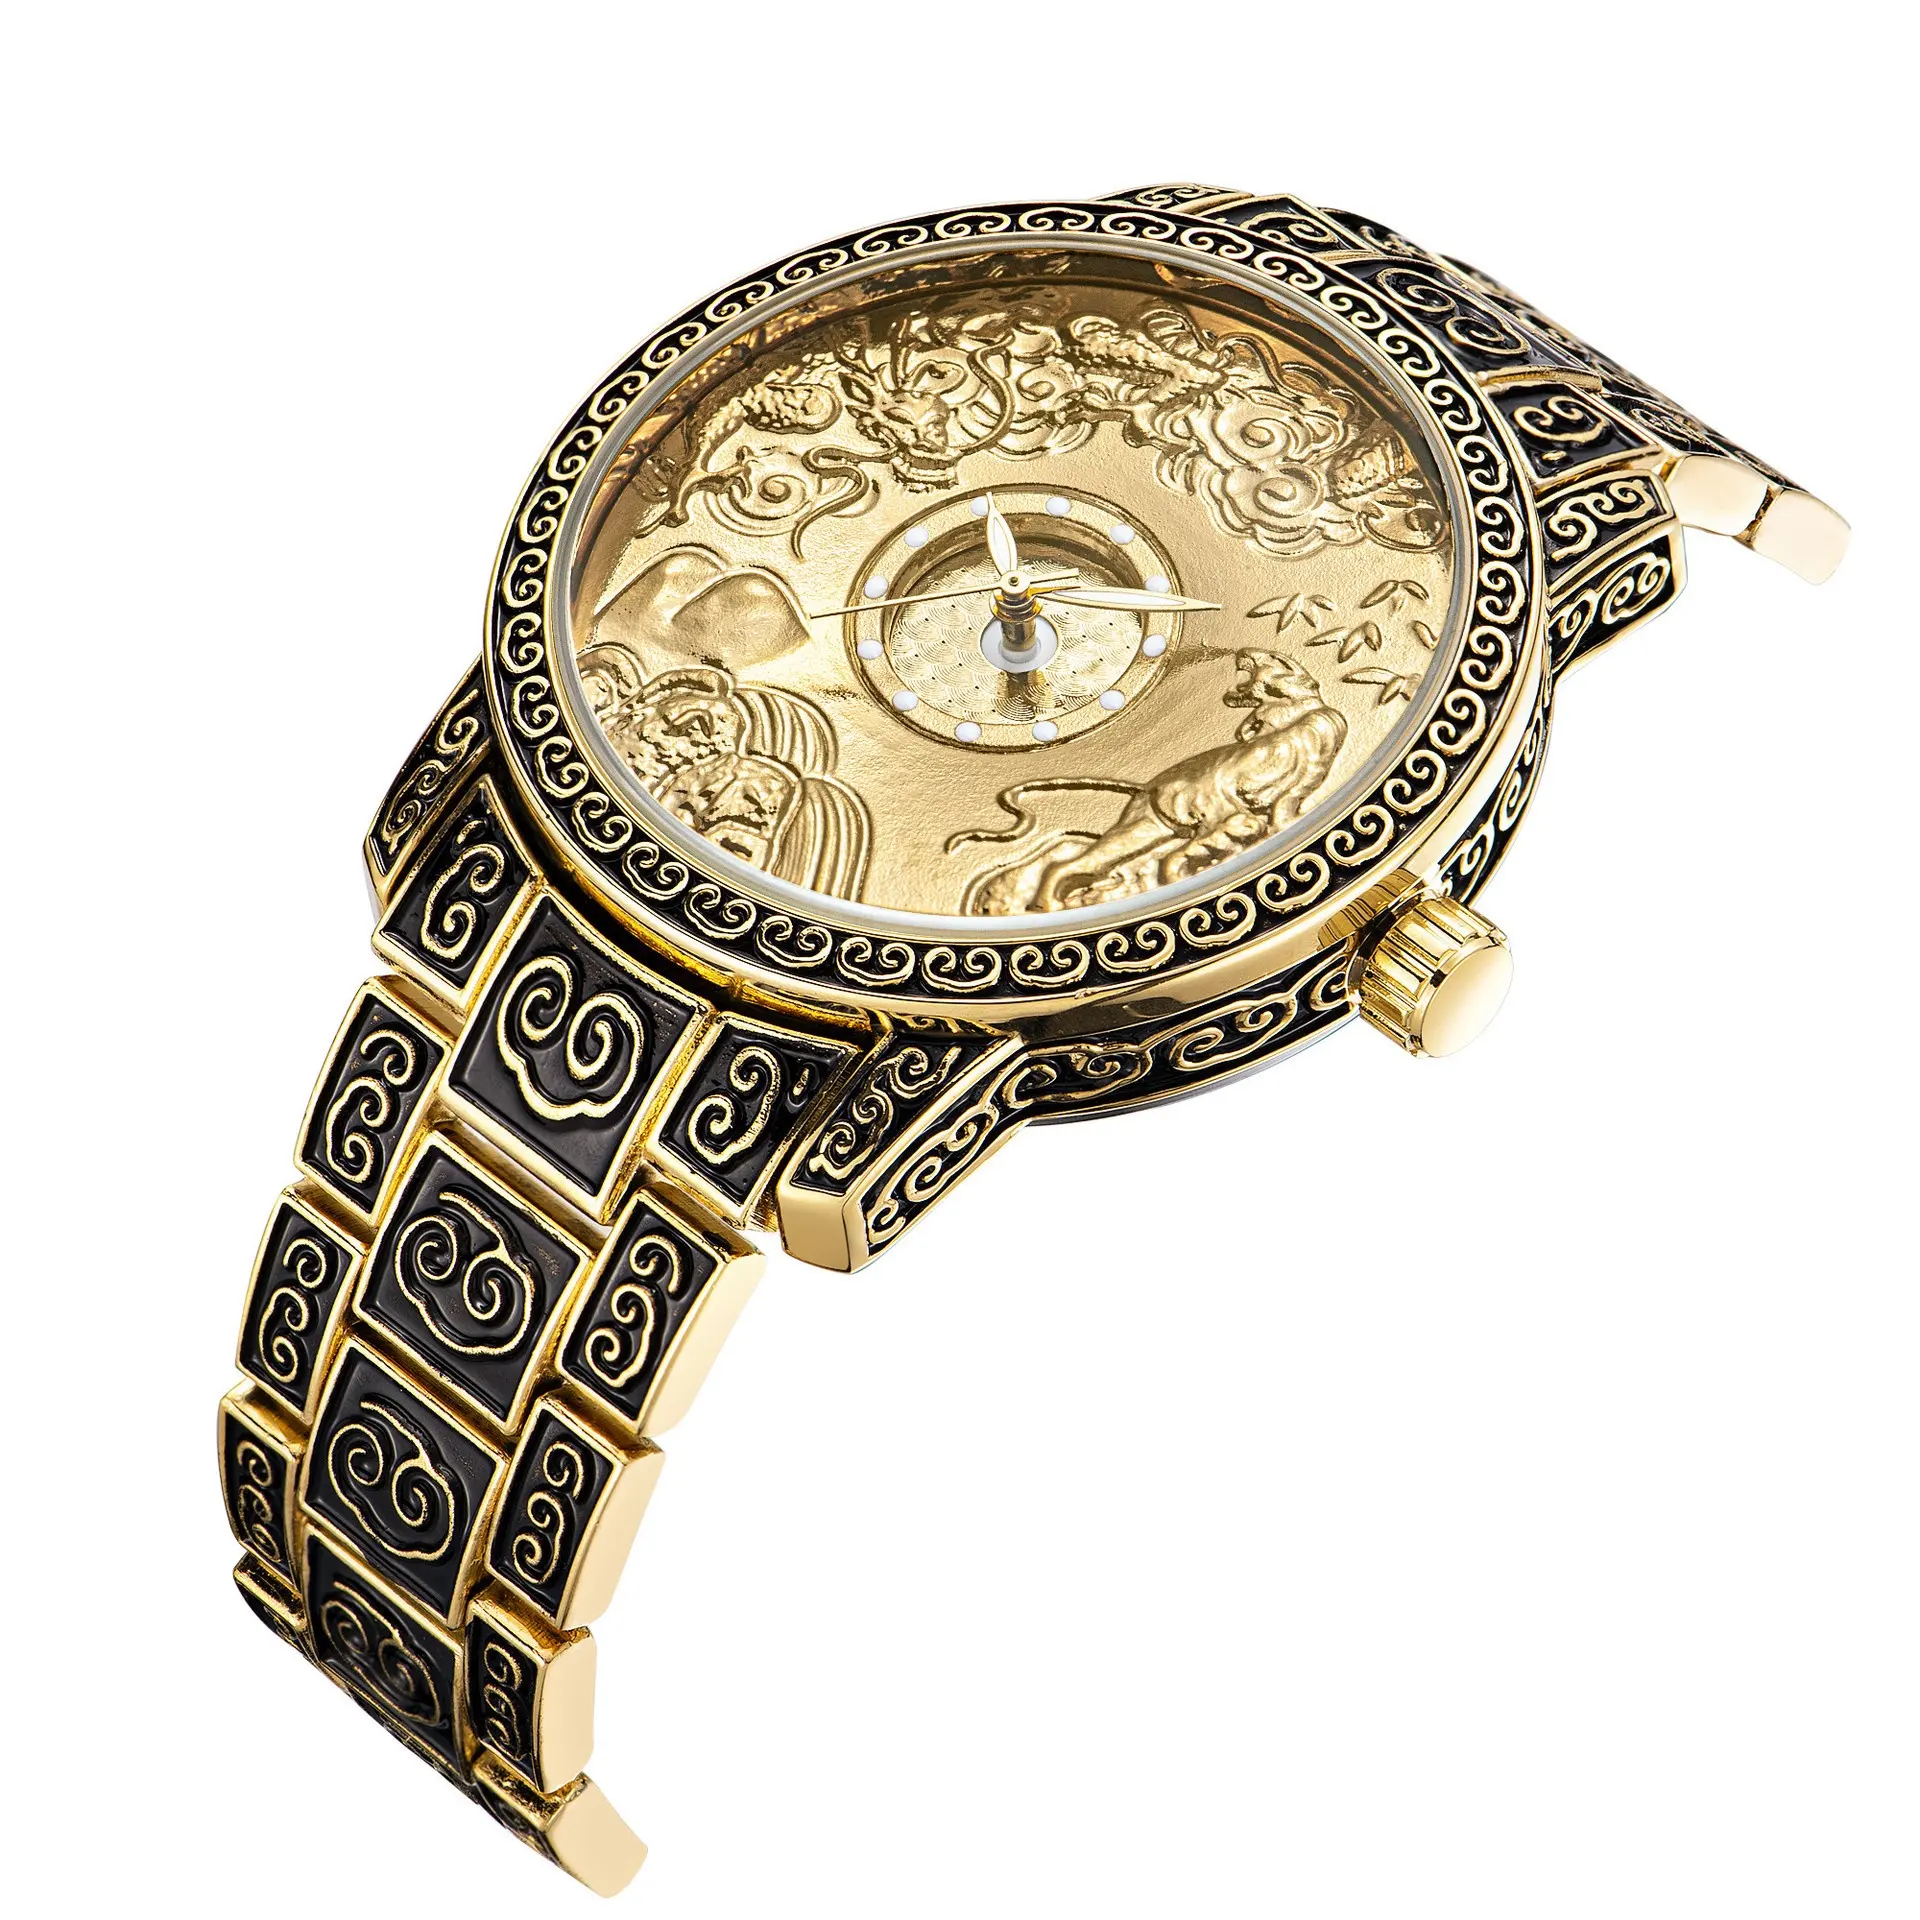 Engraved 3D Flower On Watch Case Dial and Band Gold/silver/brass And Retro Silver Vintage Style Mens Watch